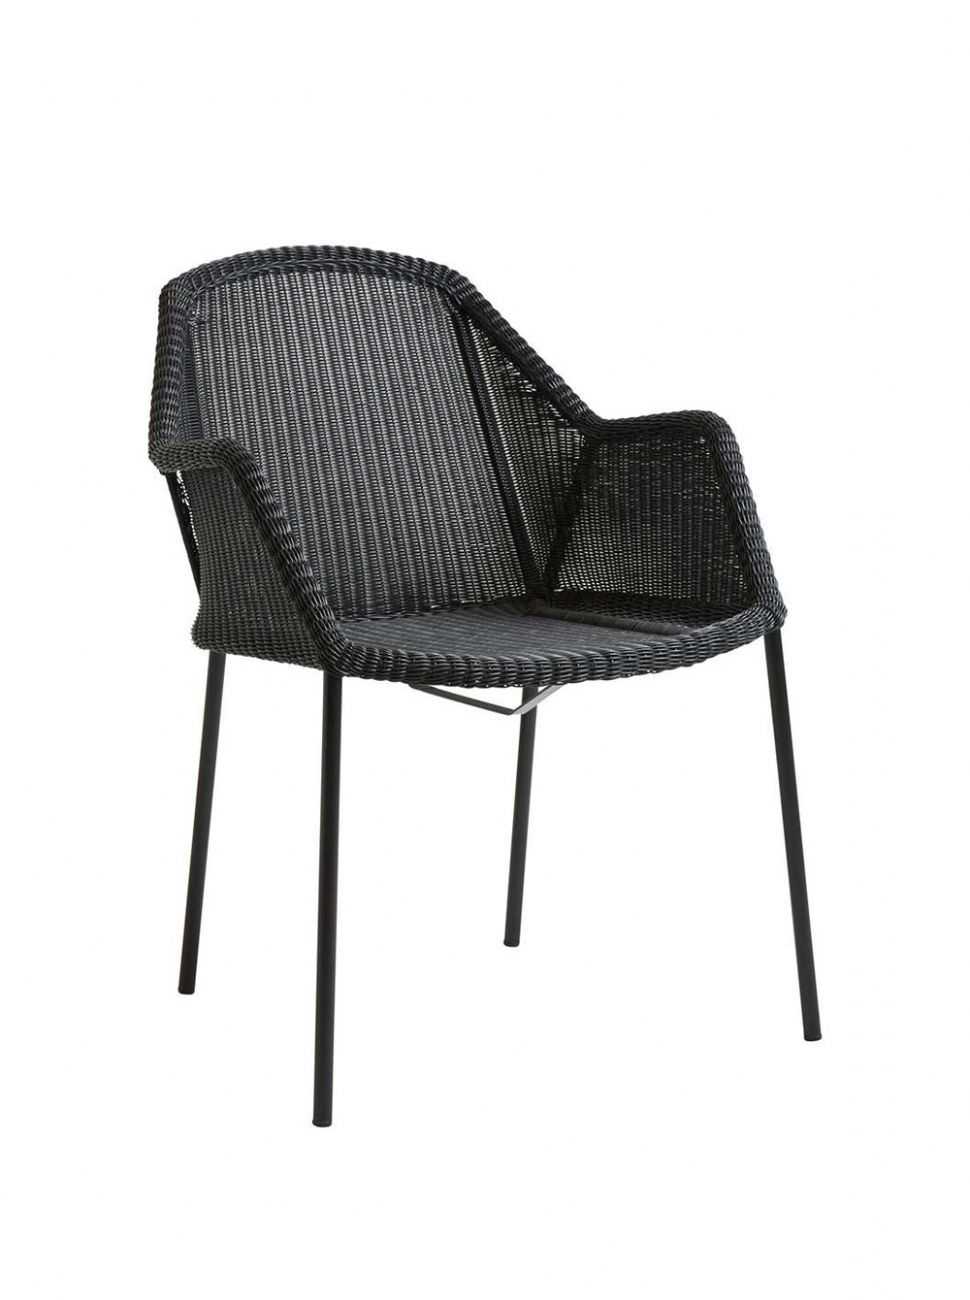 Featured Photo of Black Outdoor Chairs